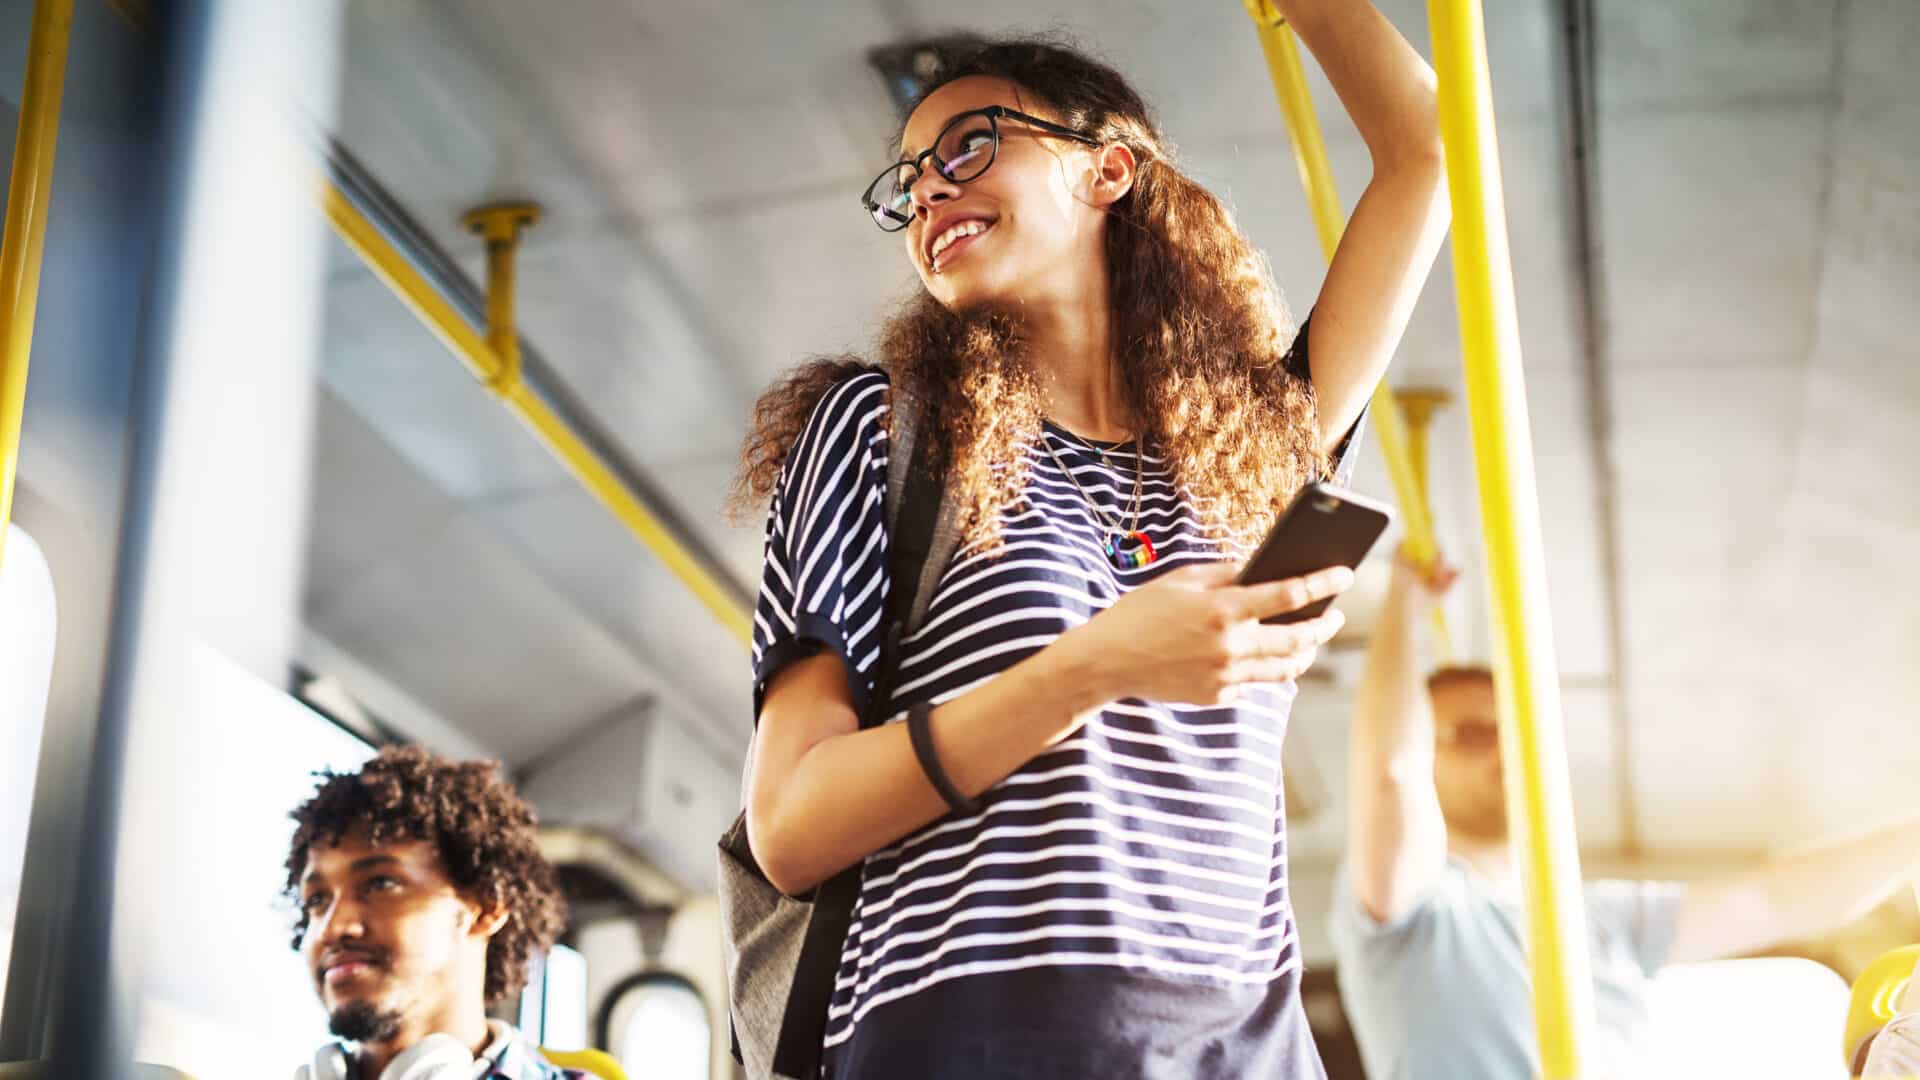 Young woman is standing on the bus using the phone and smiling.